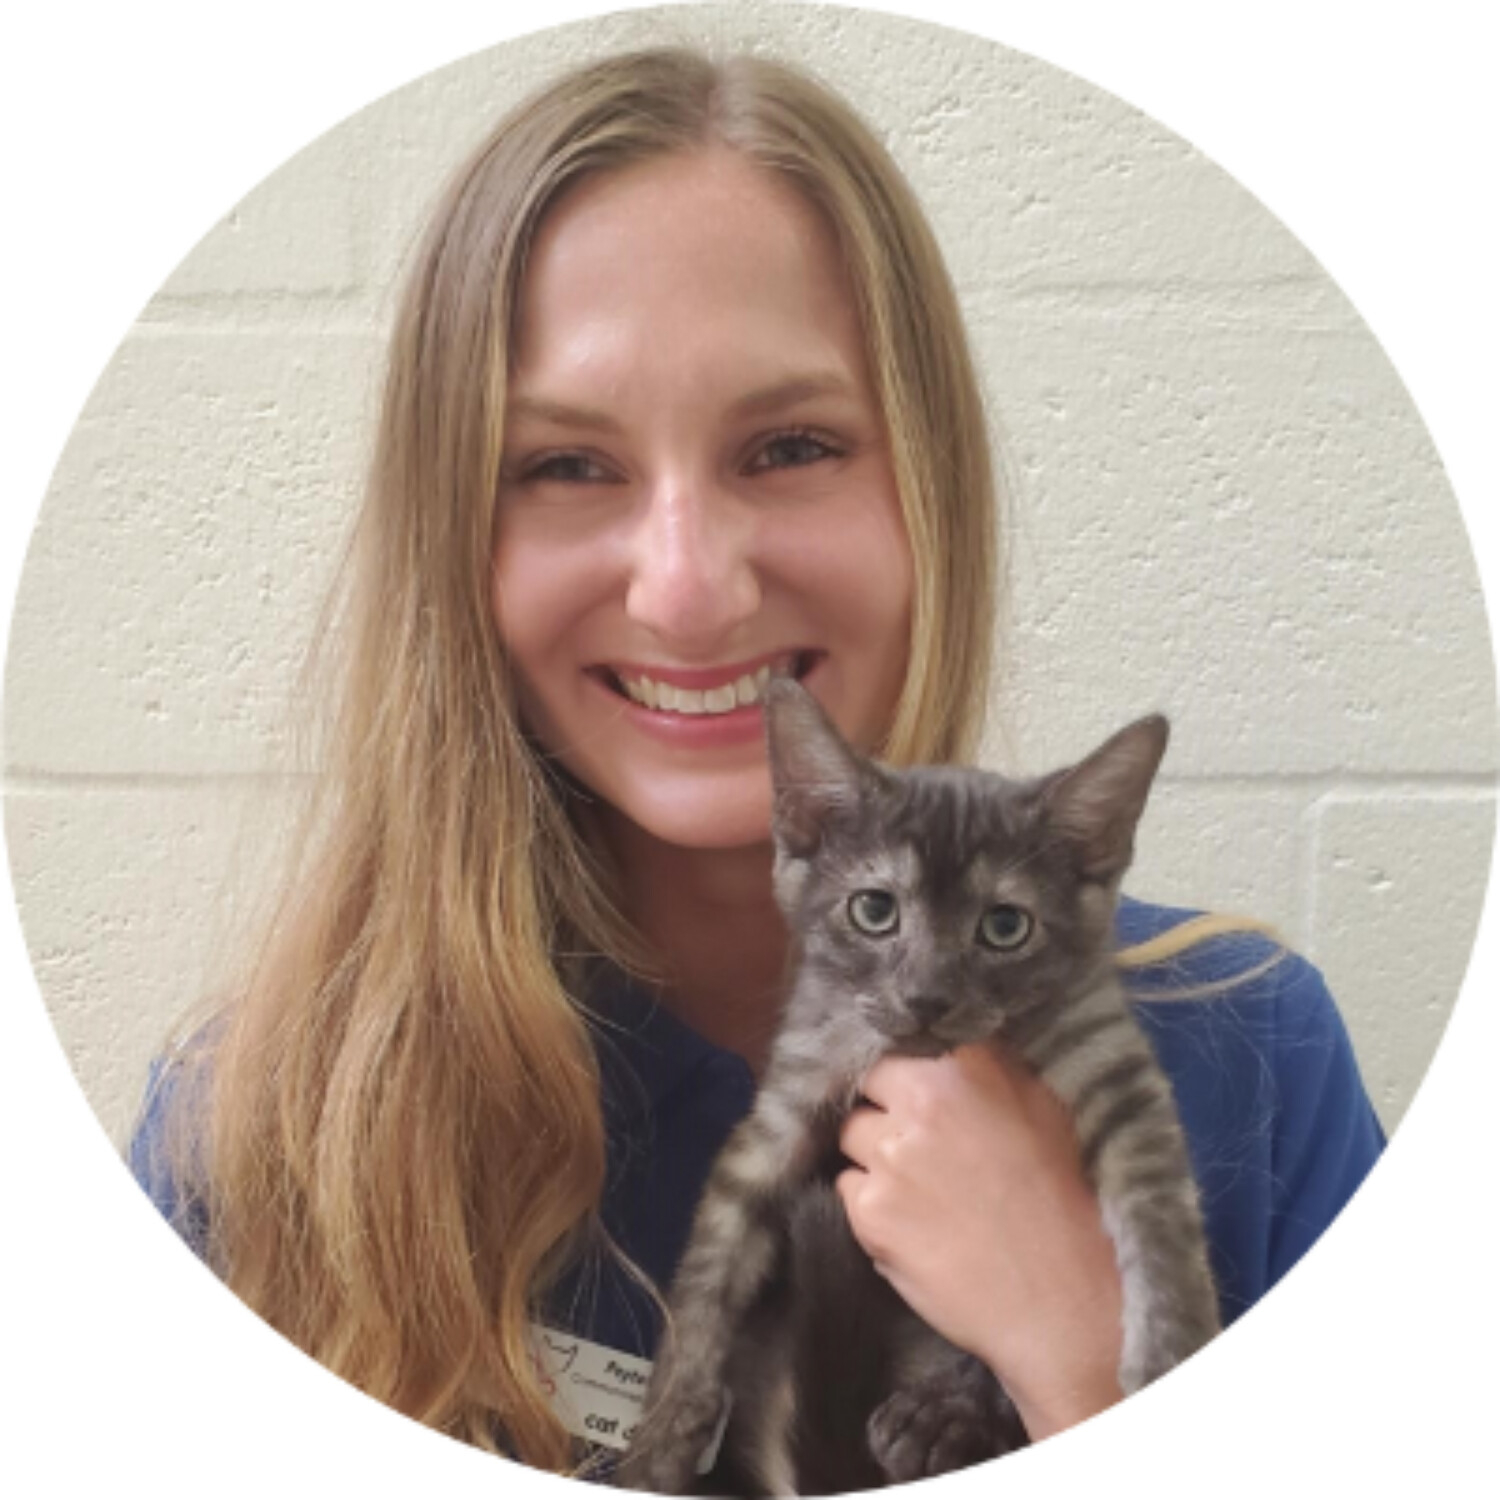 WHAT TO DO WHEN YOU FIND A KITTEN - PAYTON DAVIS, COMMUNICATIONS SPECIALIST